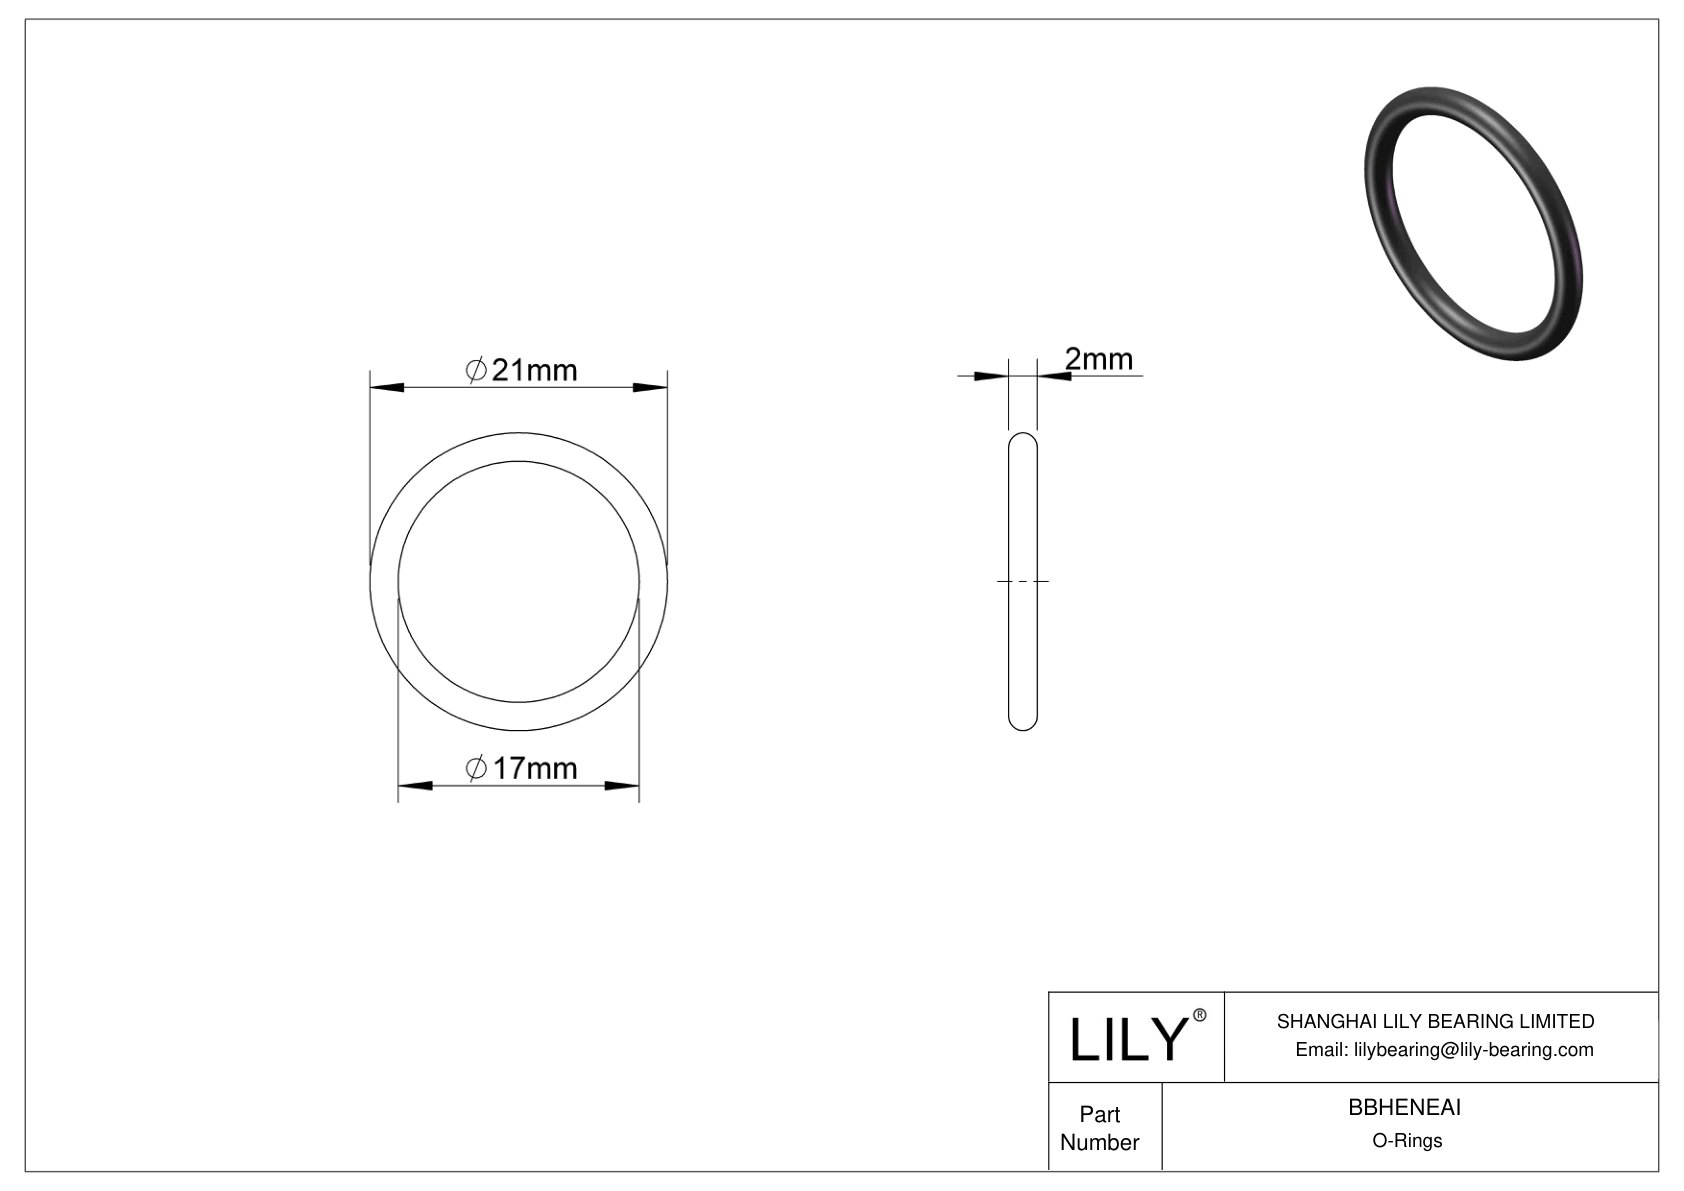 BBHENEAI Oil Resistant O-Rings Round cad drawing